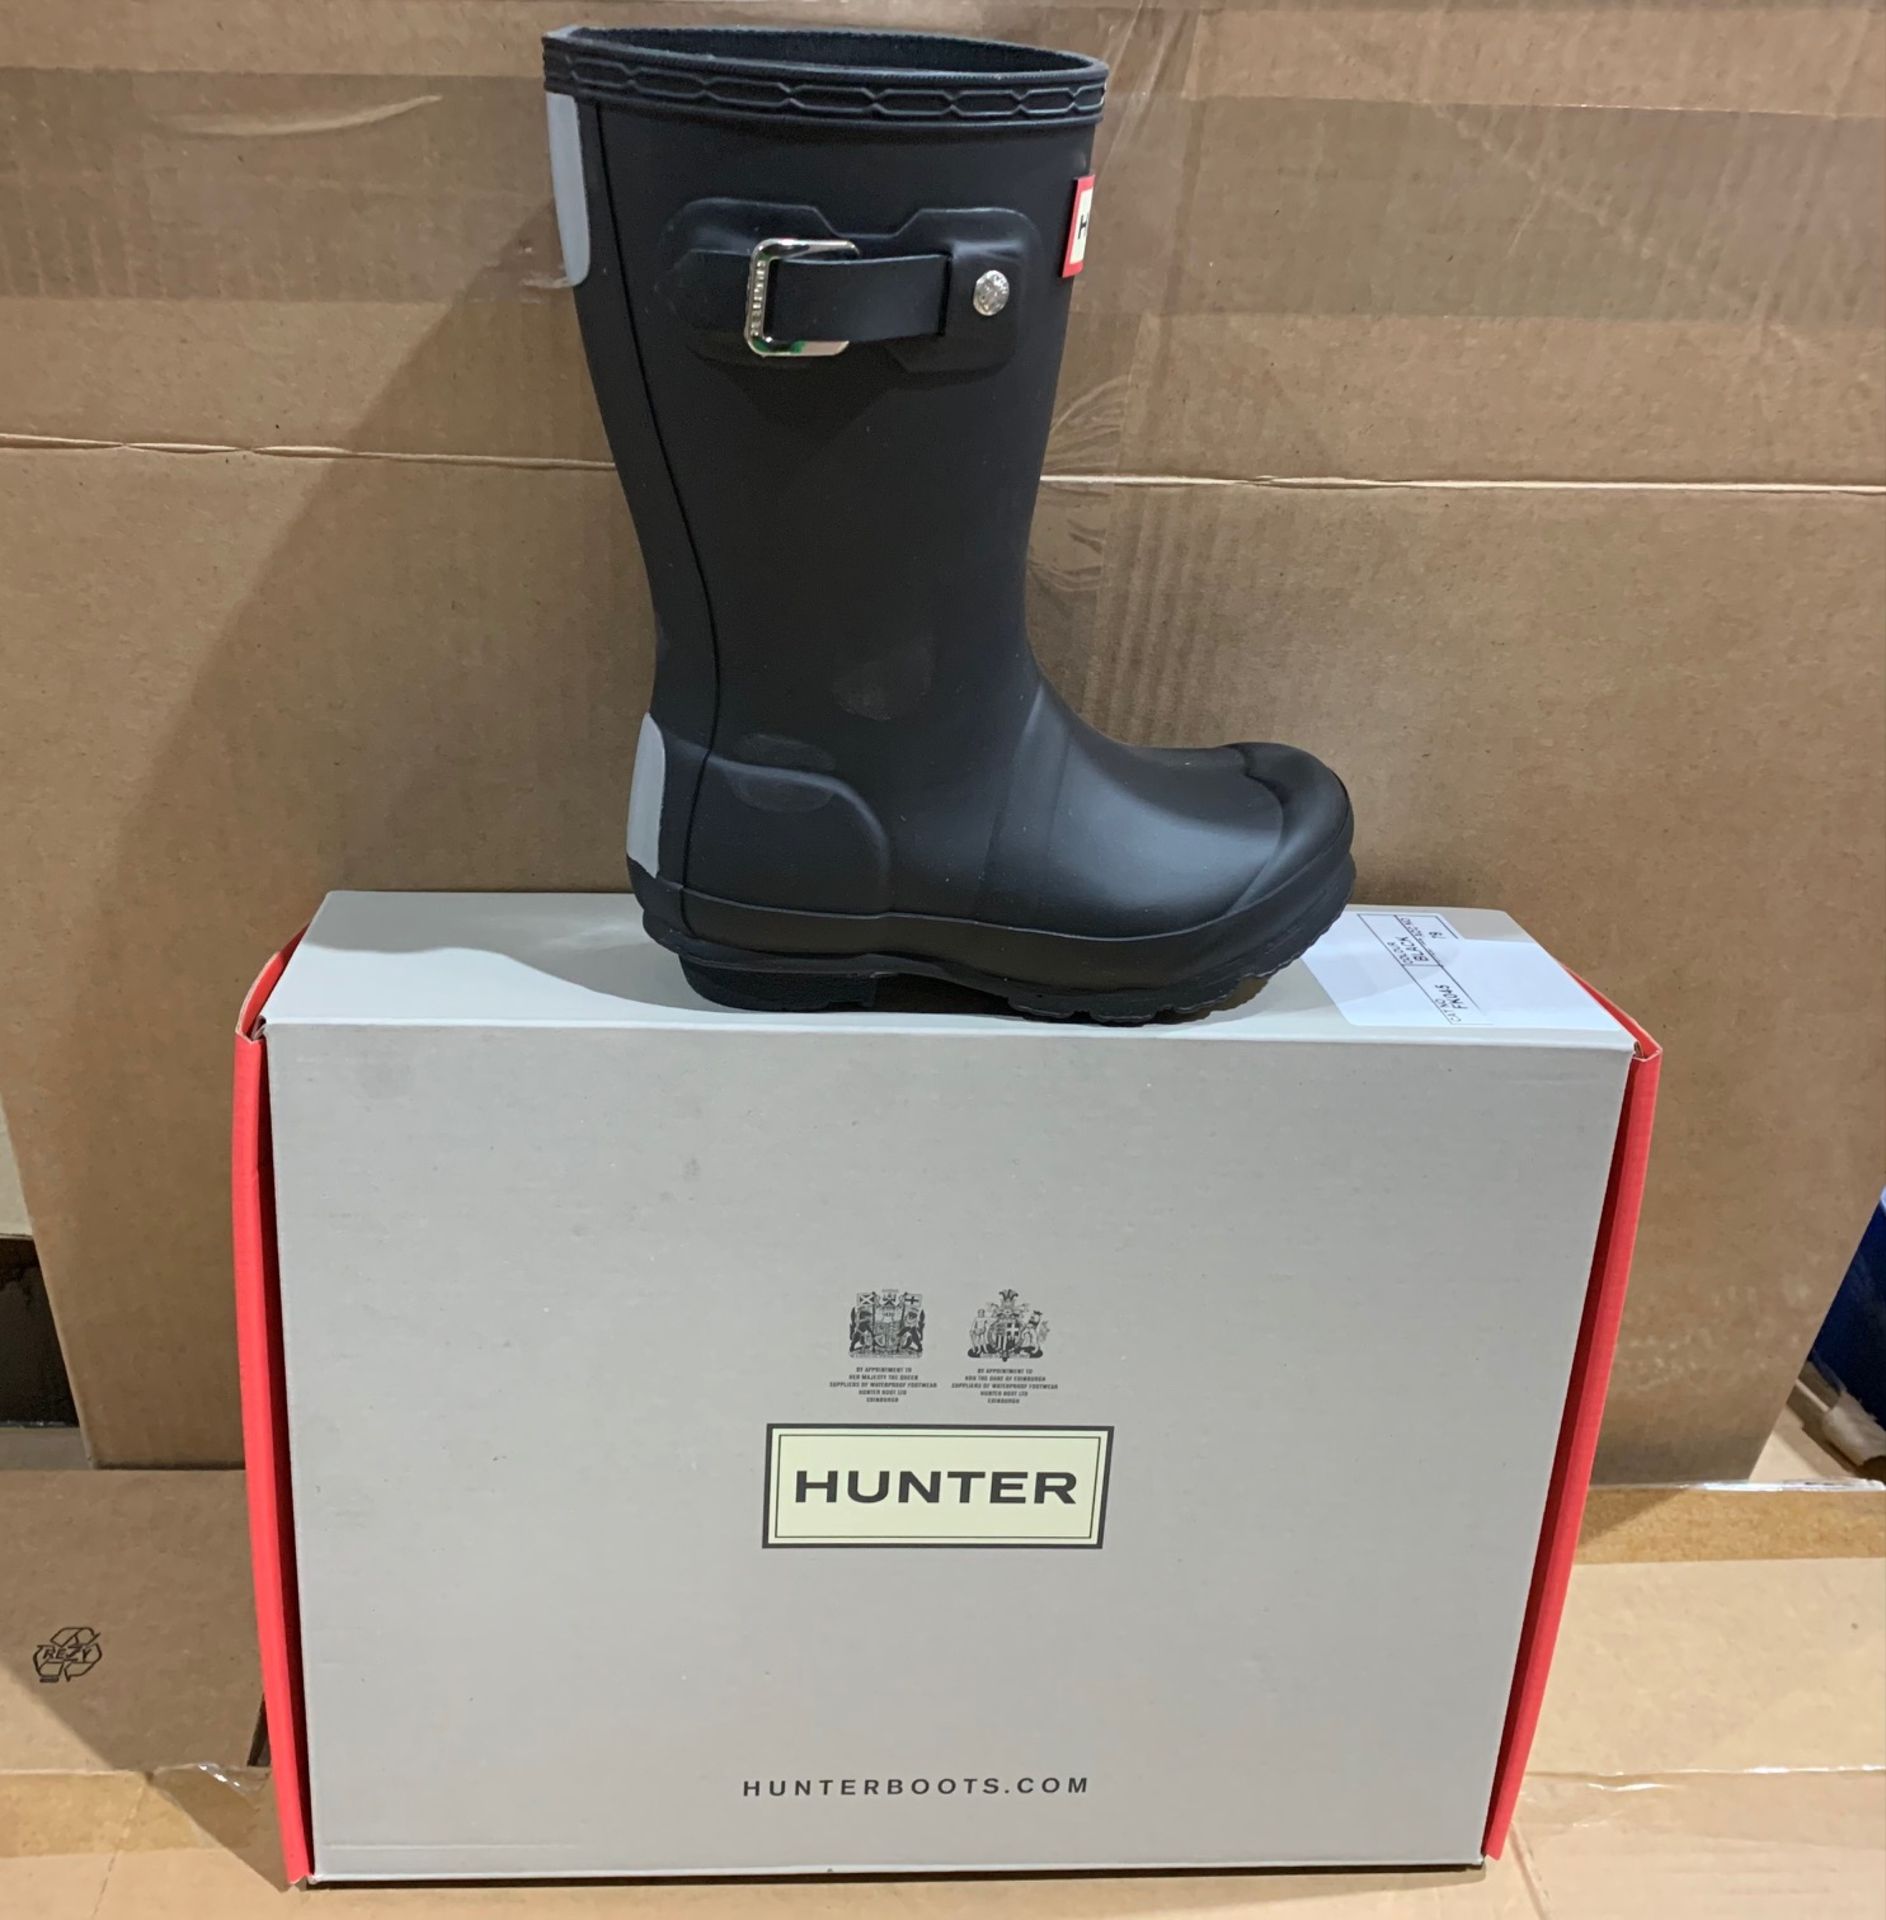 1 X NEW & BOXED HUNTER BOOTS SIZE INFANT 9